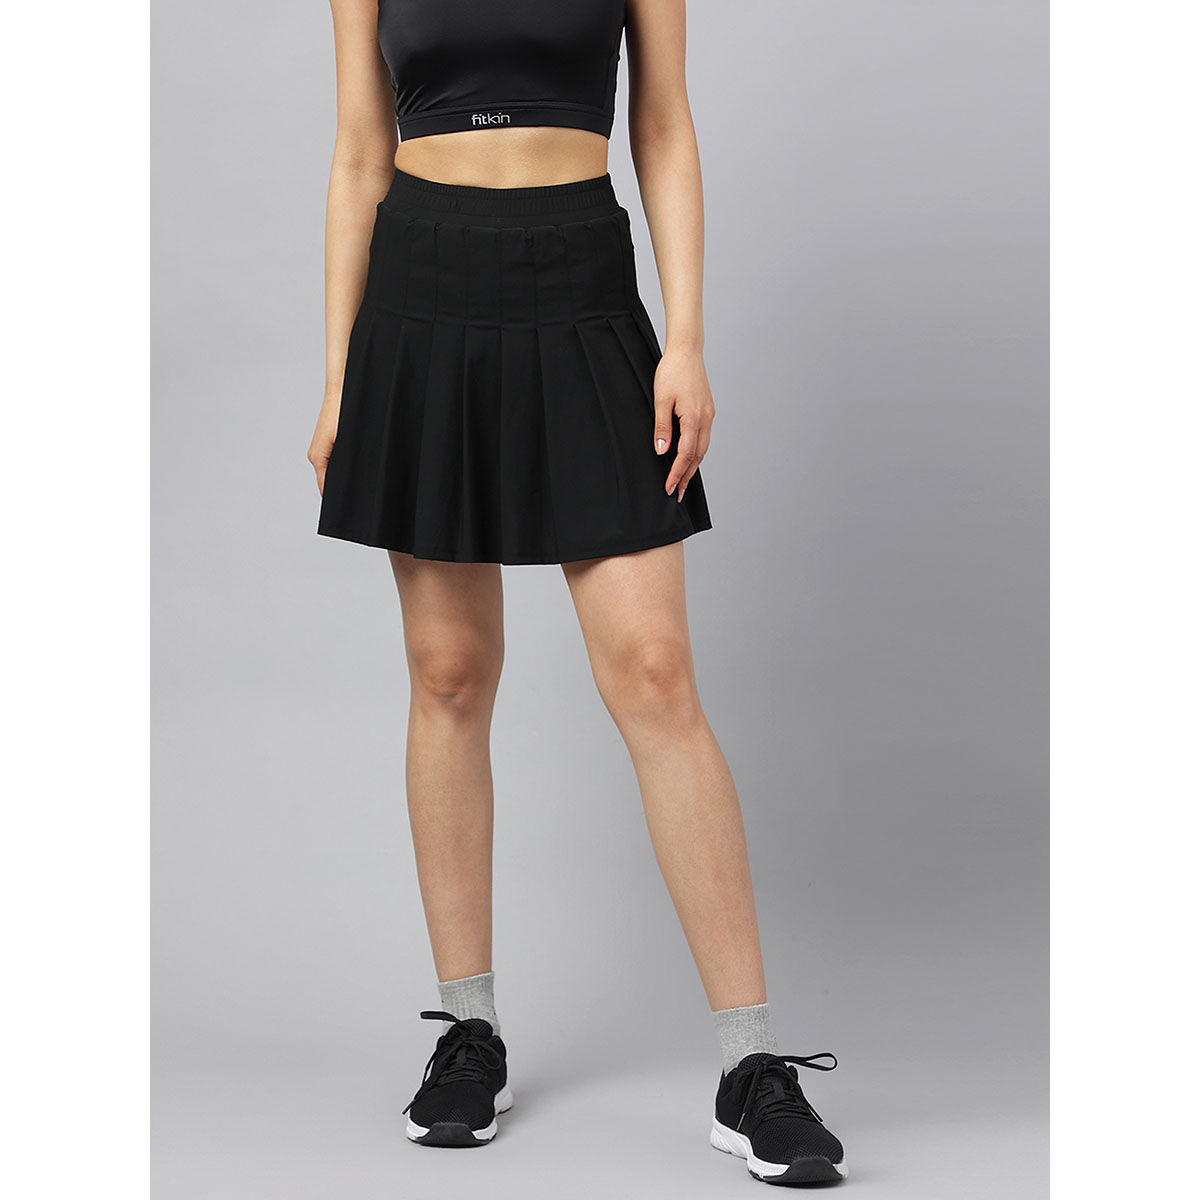 Top more than 81 tennis skirt india latest